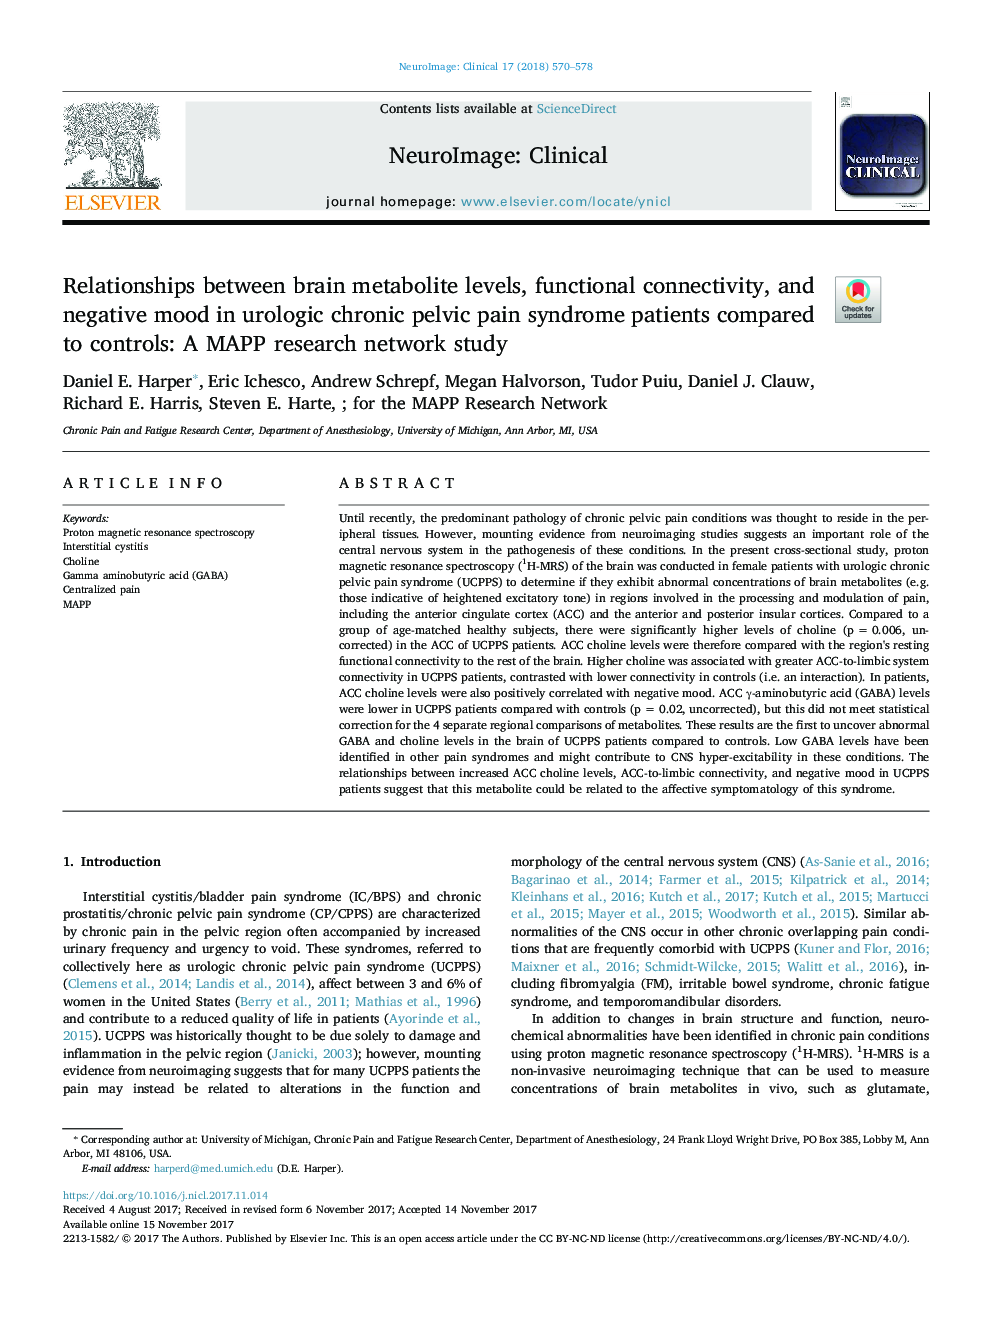 Relationships between brain metabolite levels, functional connectivity, and negative mood in urologic chronic pelvic pain syndrome patients compared to controls: A MAPP research network study